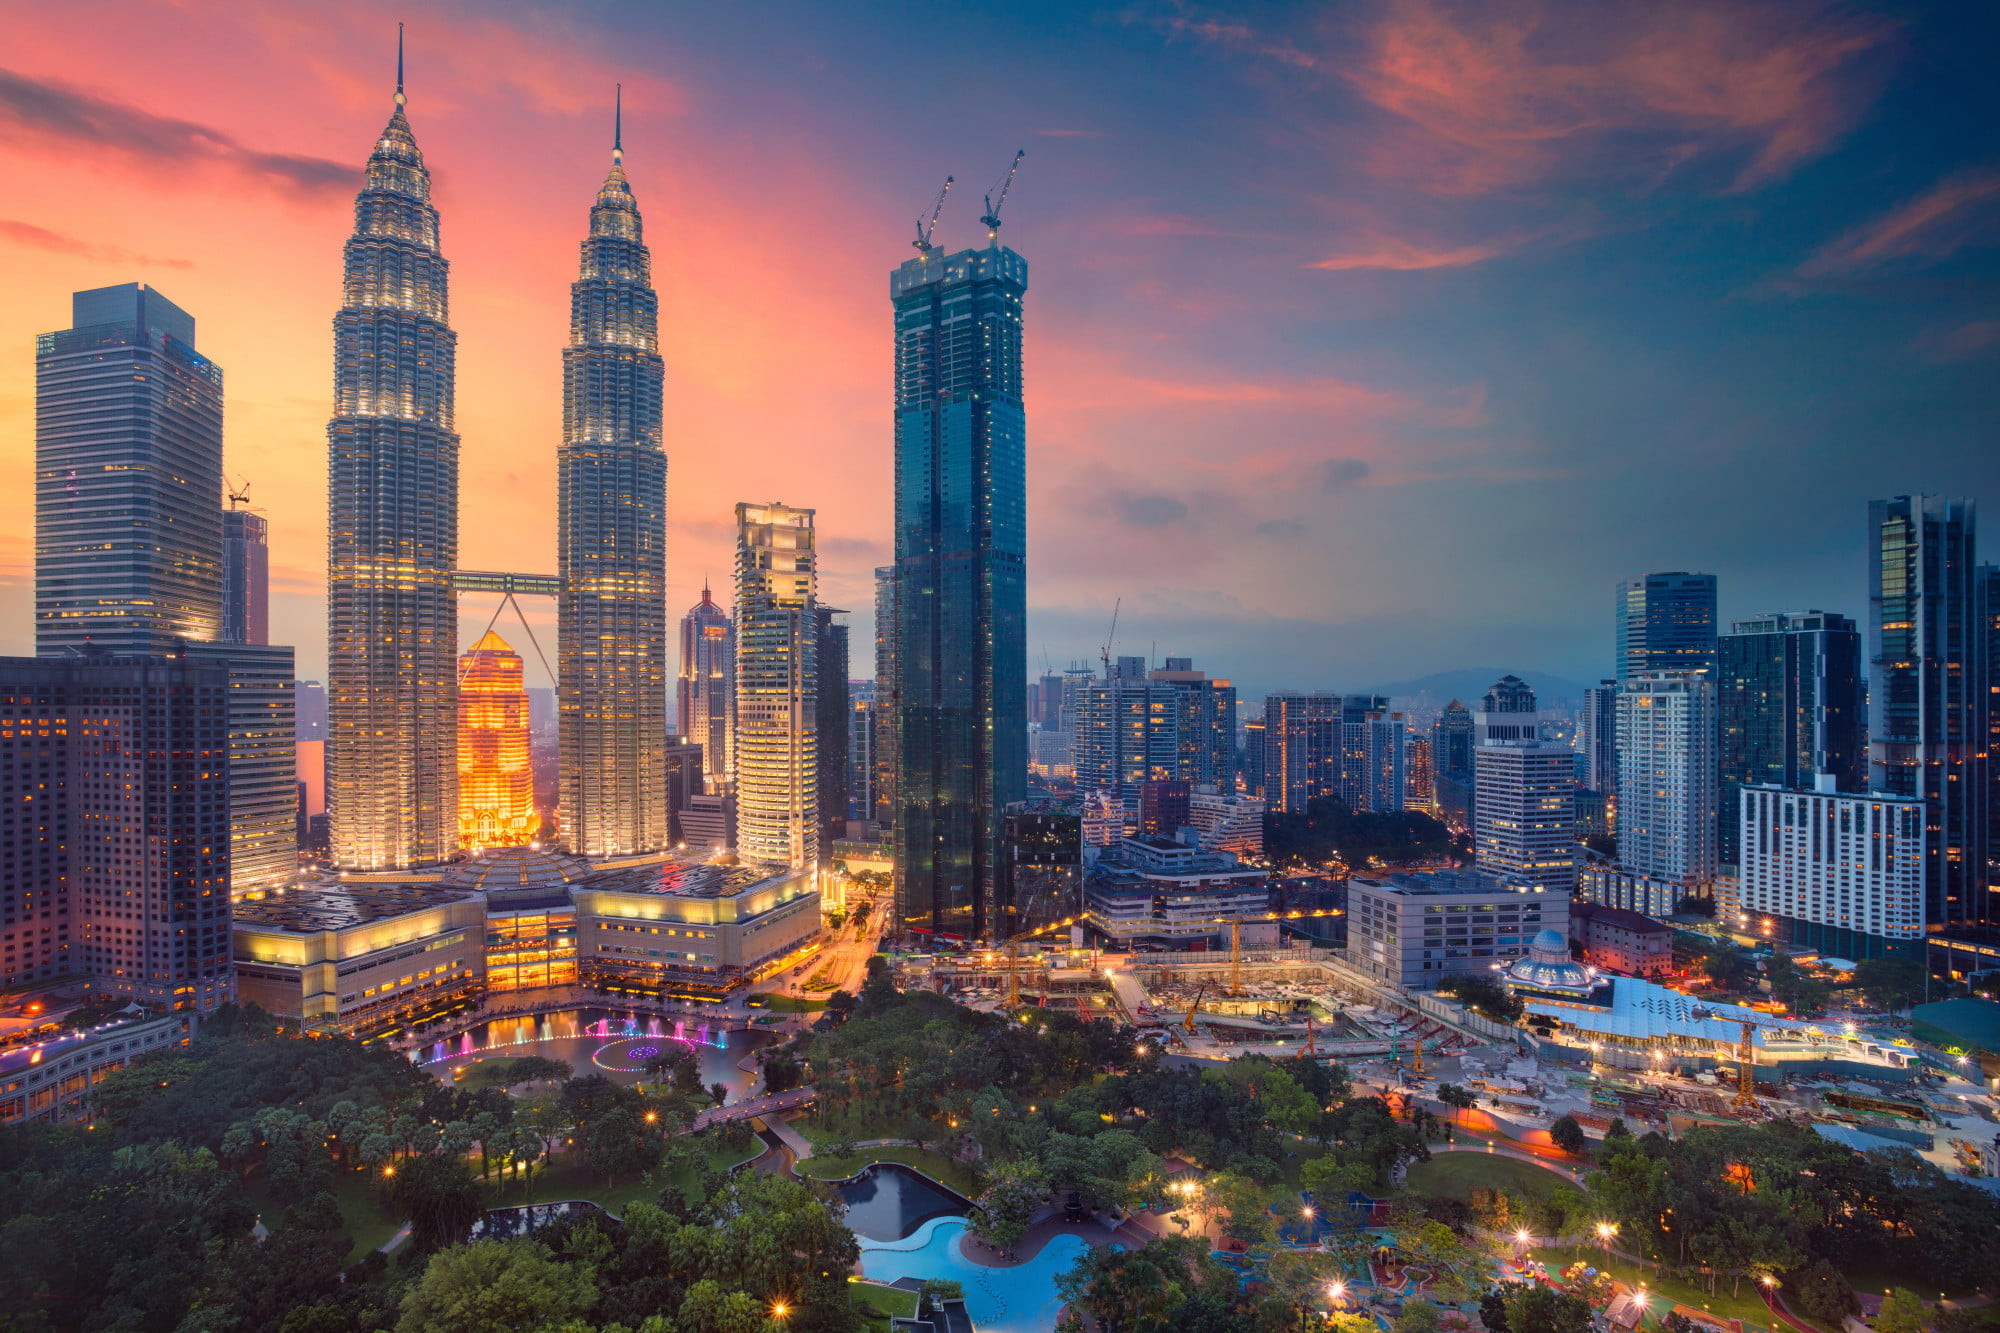 Do you want to start investing your hard earned money abroad? Here are the undeniable financial benefits of investing in Malaysia.